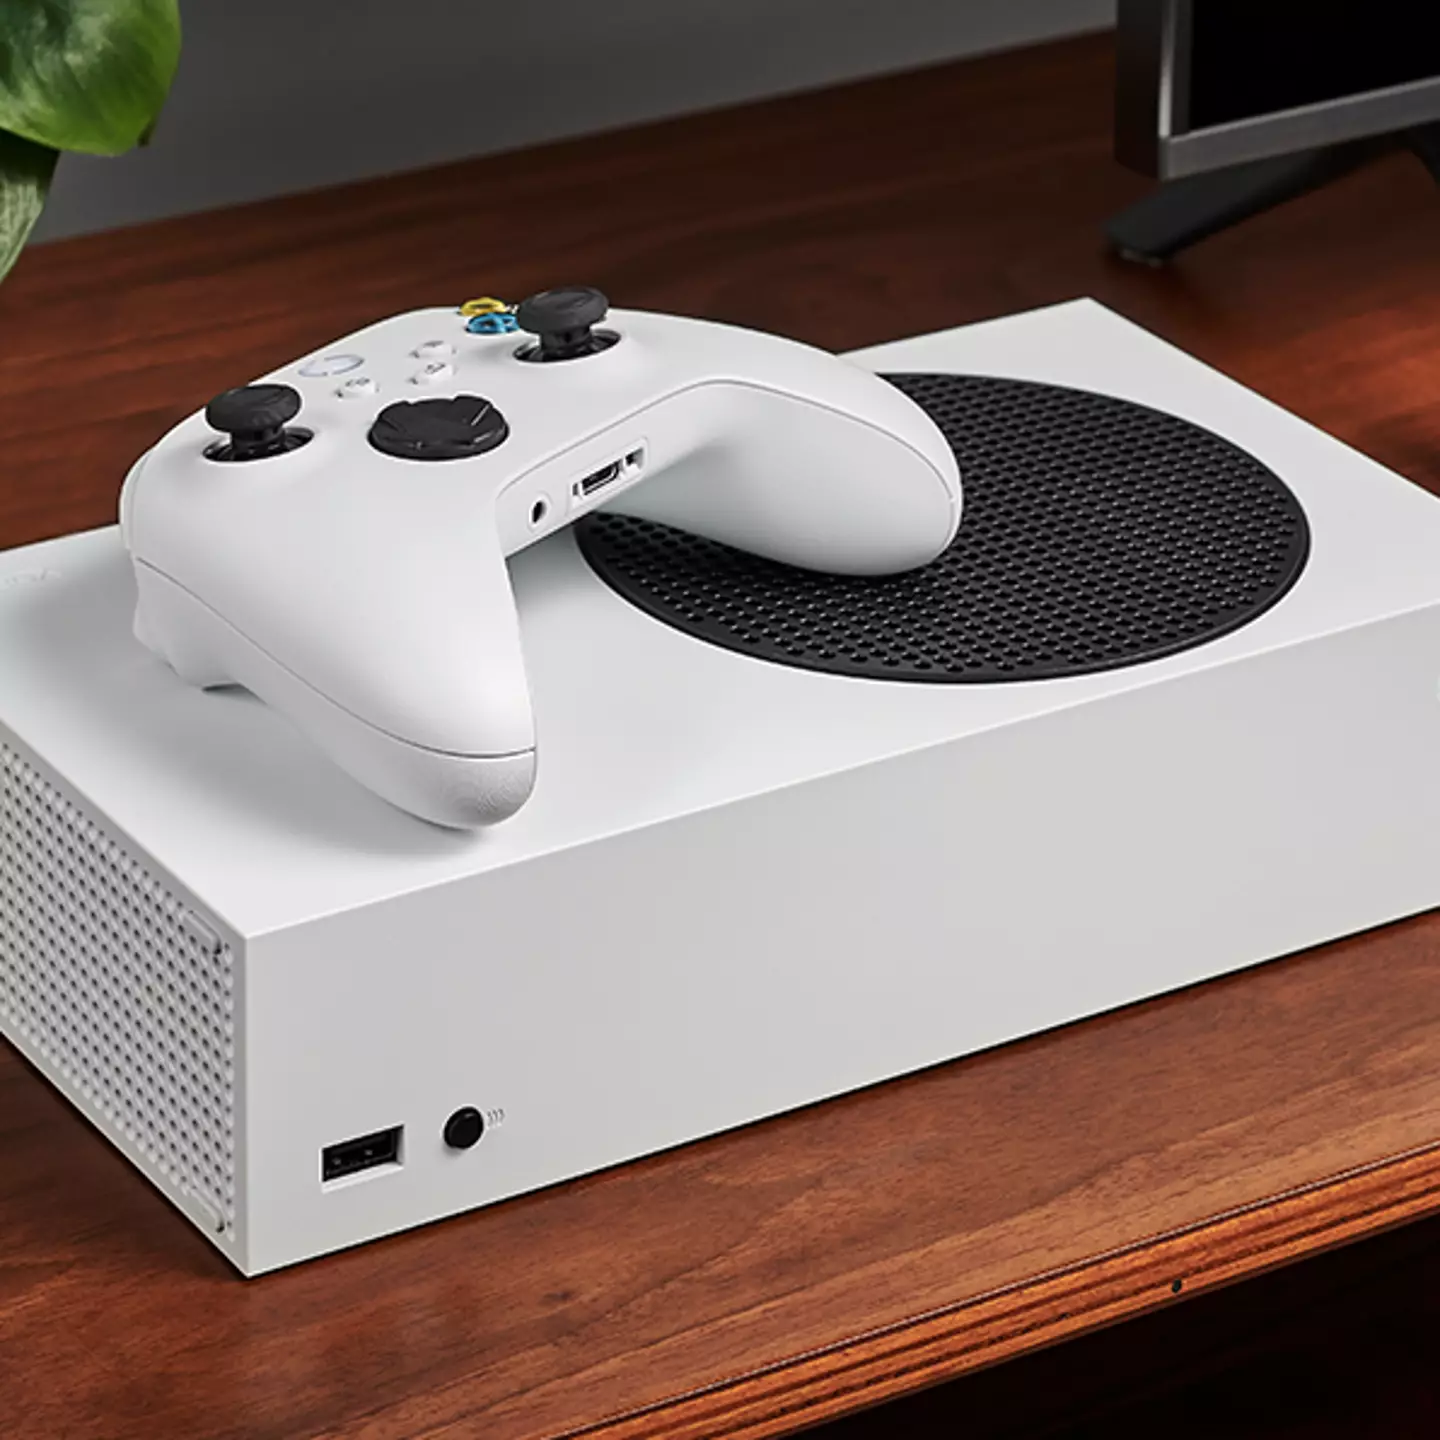 Xbox fans are 'going to sell' their consoles after major new product leaks